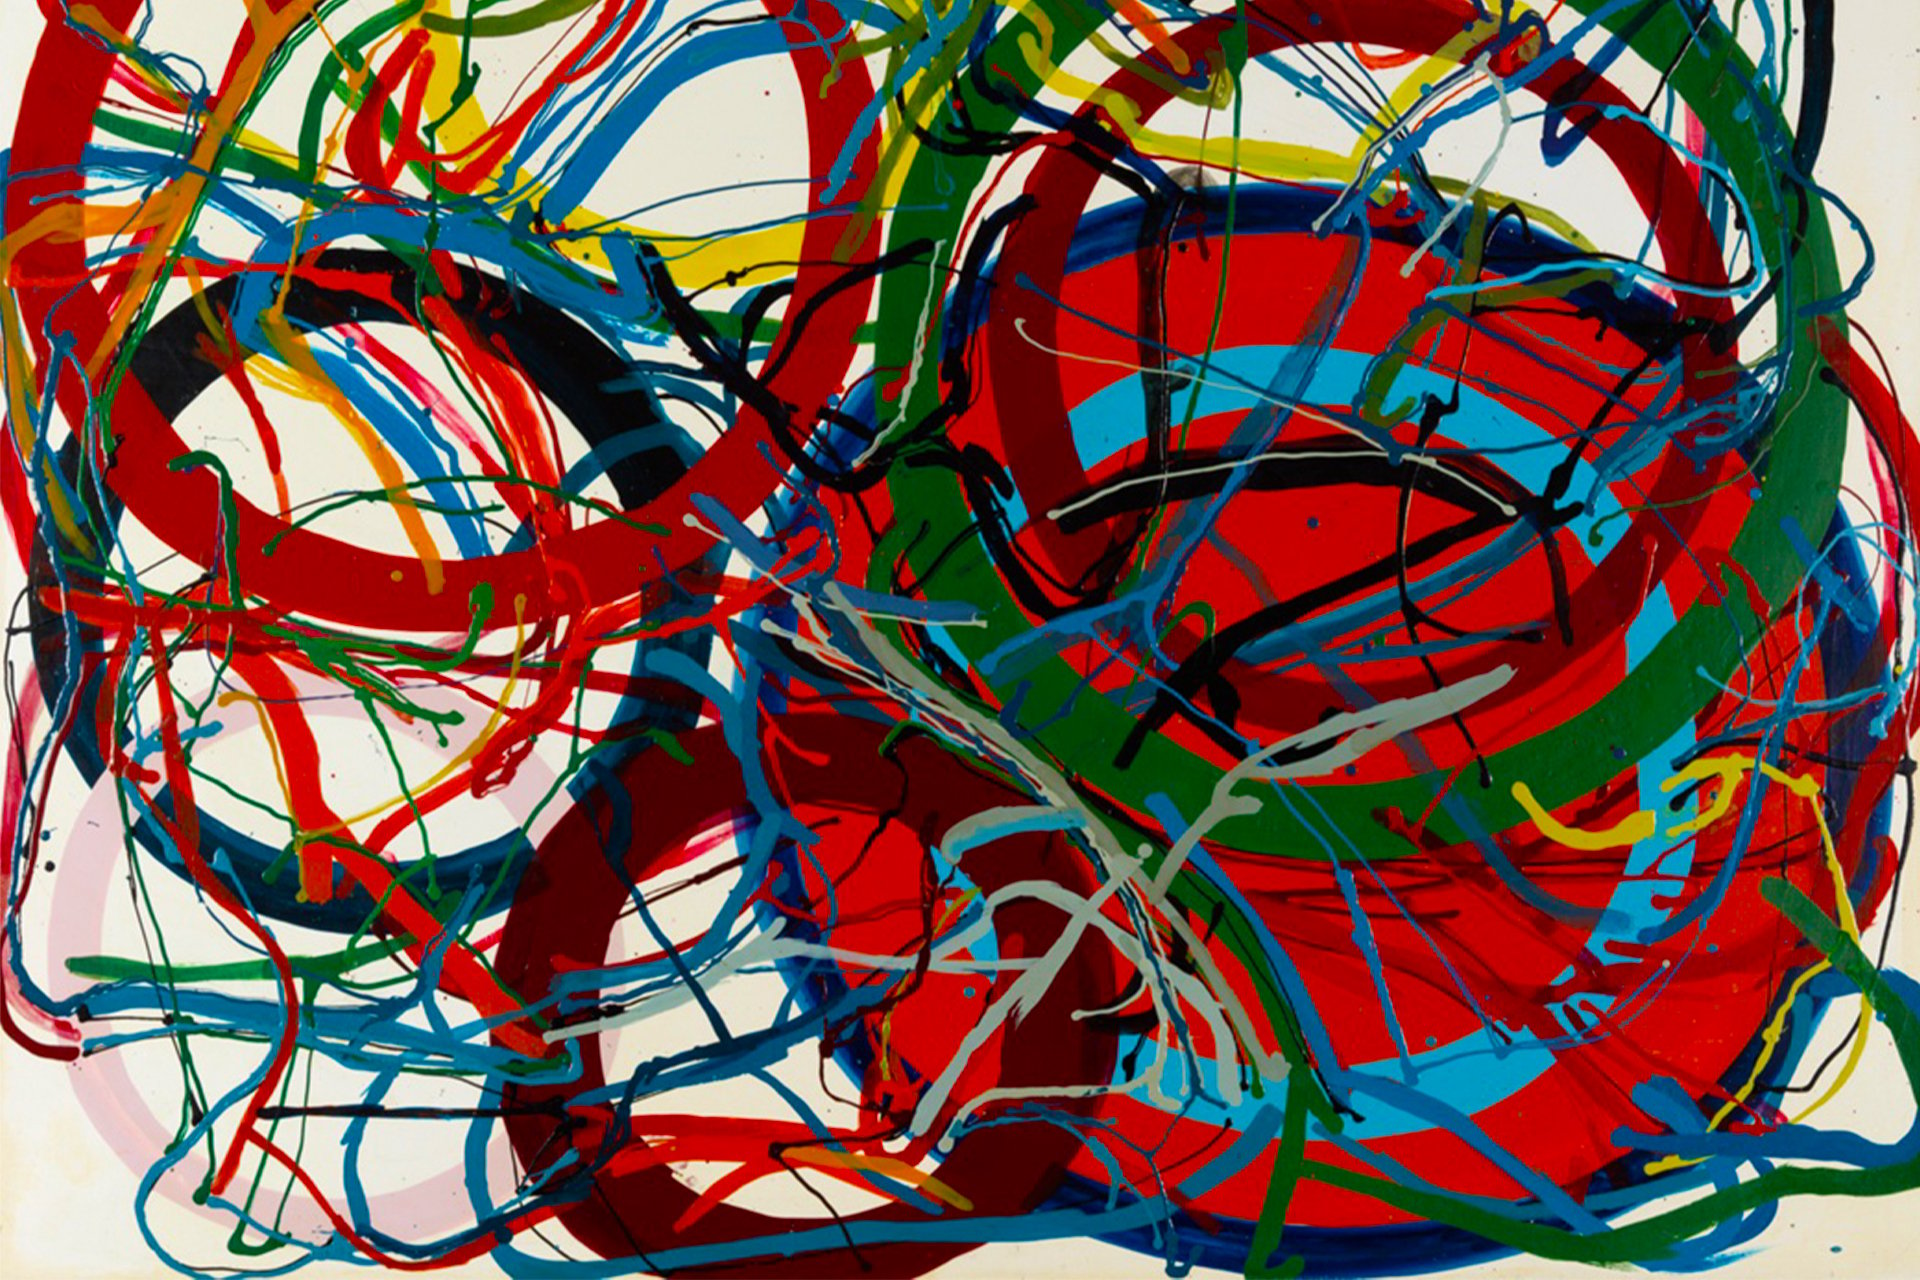 Dynamic abstract painting with vibrant red, blue, and green swirls and splatters, illustrating various abstract art compositions.